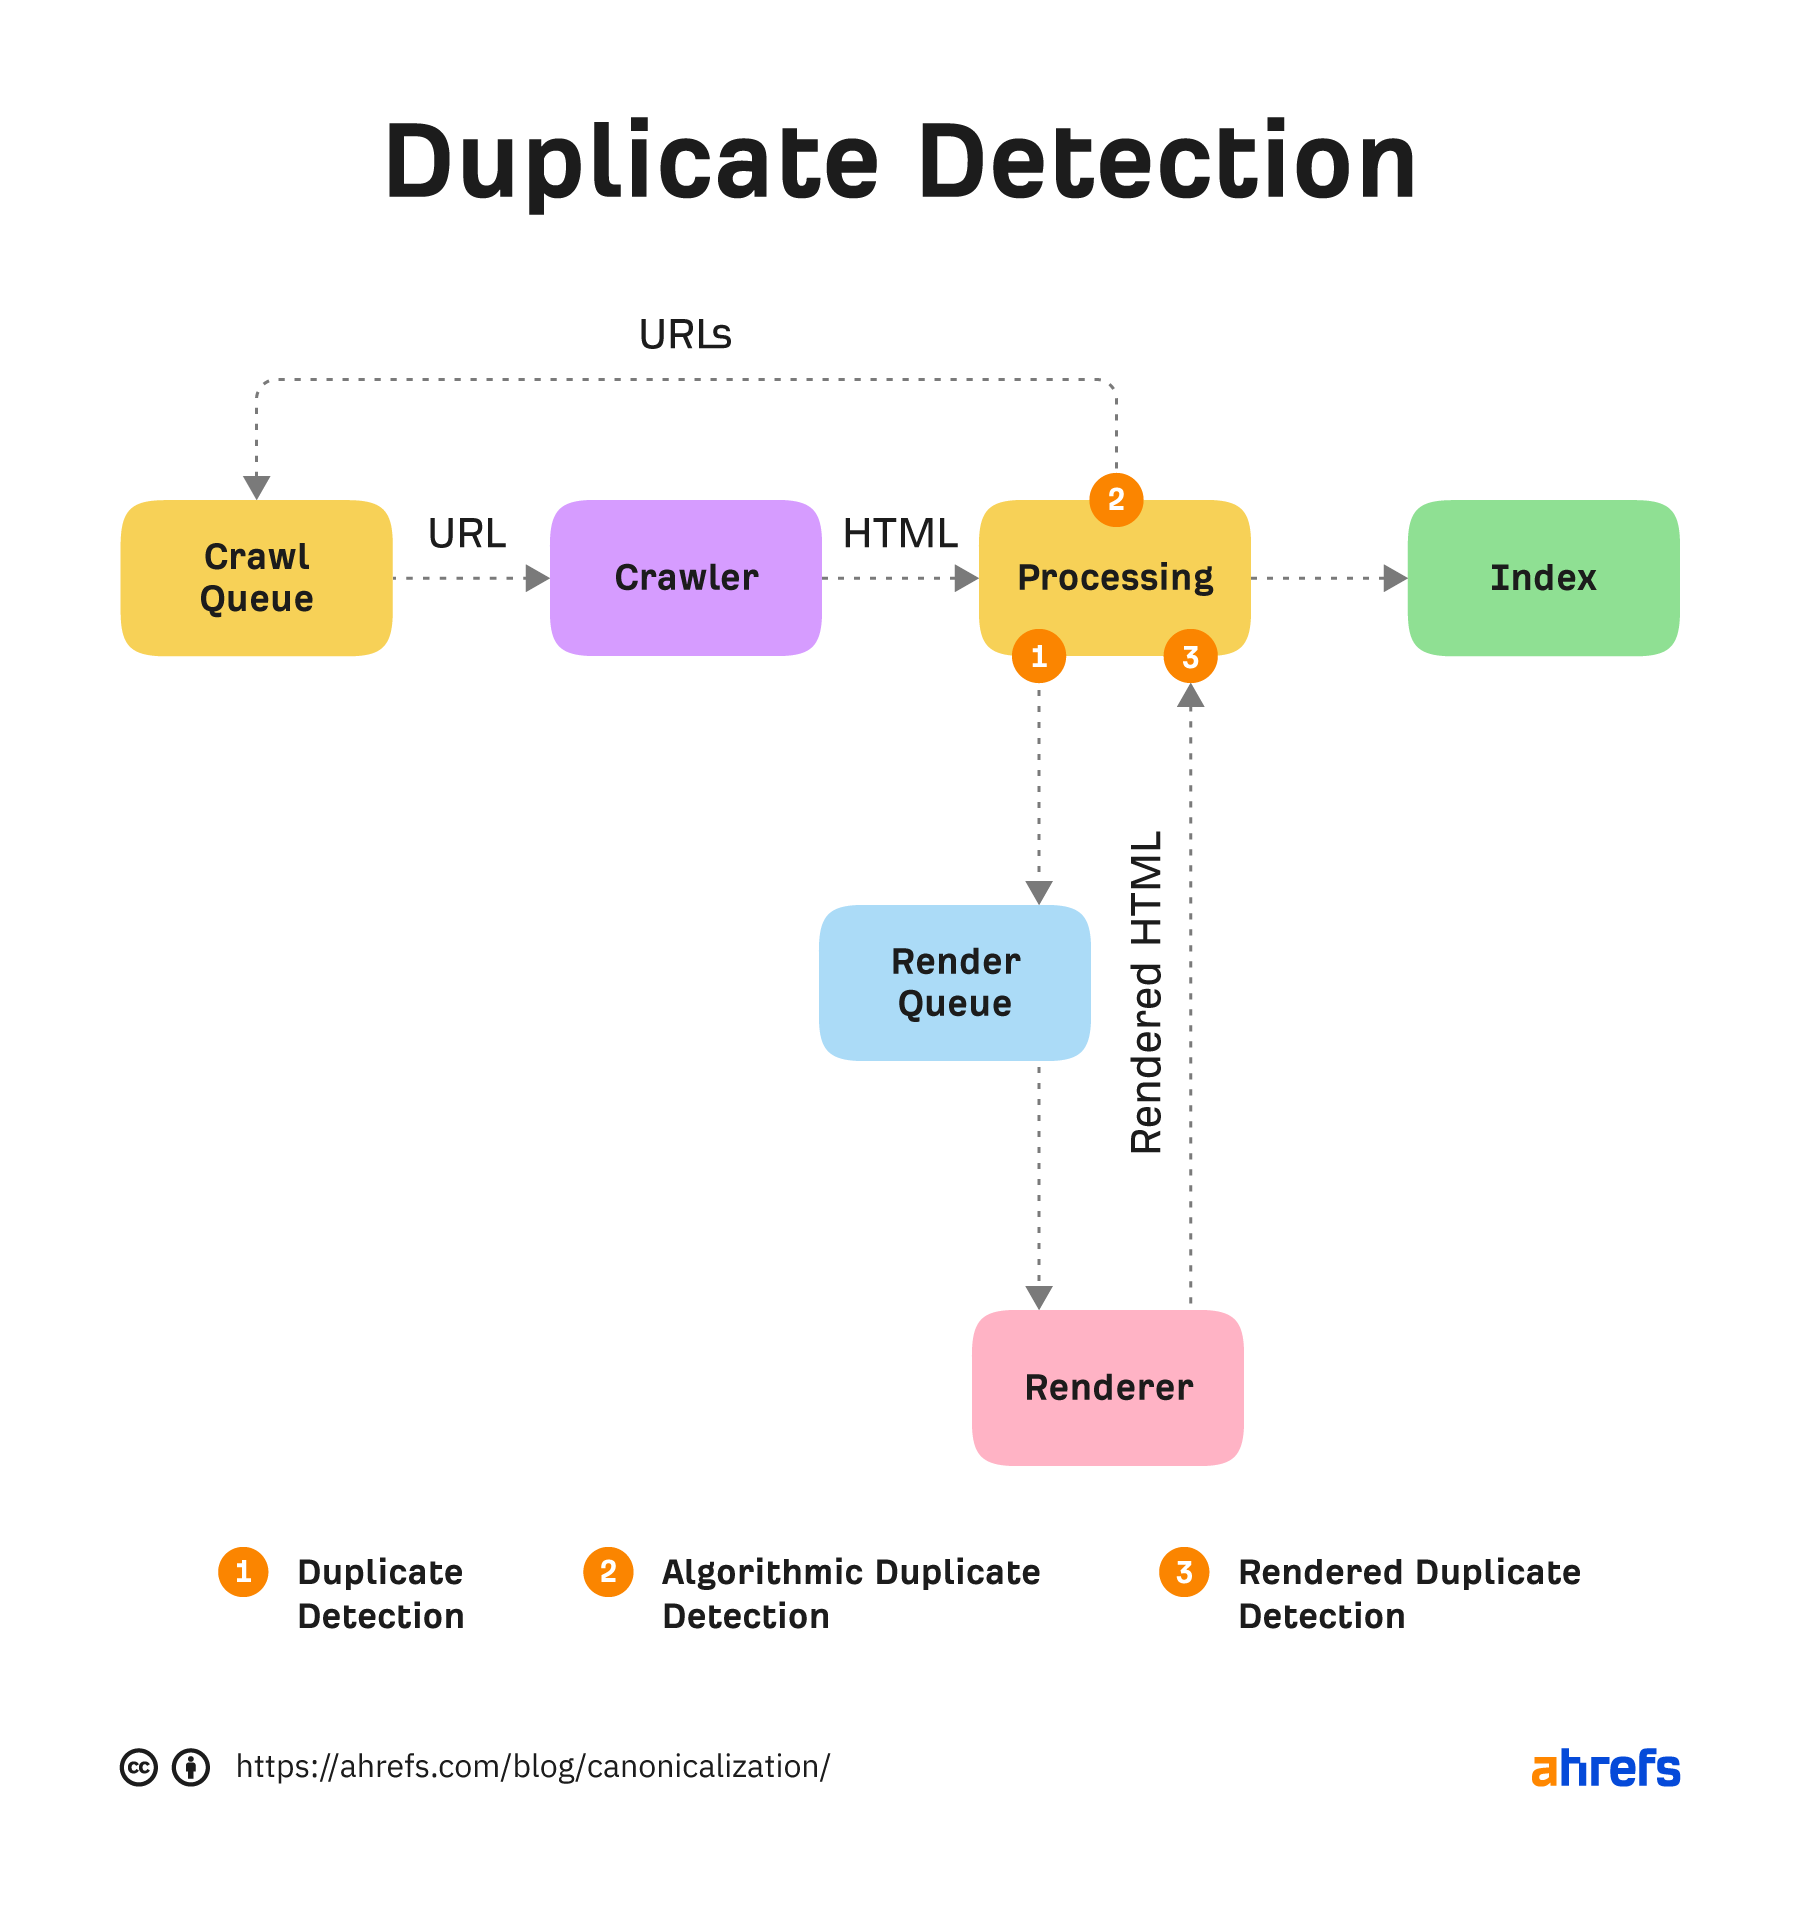 Google’s render path marked up where I believe duplicate detection systems are run.